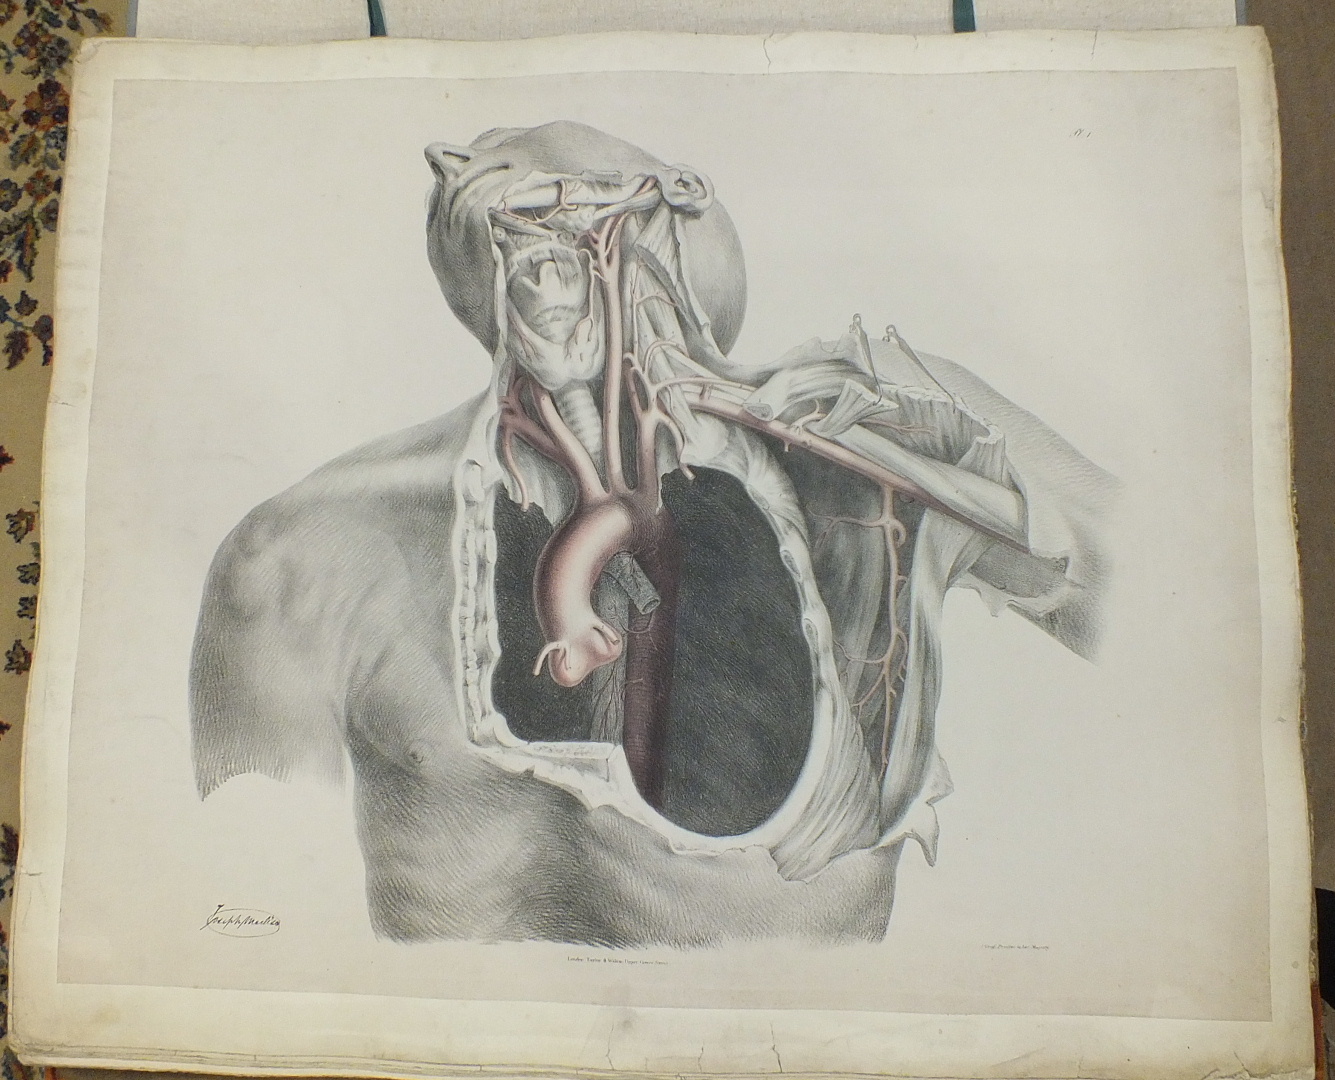 Quain (Richard), The Anatomy of the Arteries of the Human Body with its Applications to Pathology - Image 2 of 4